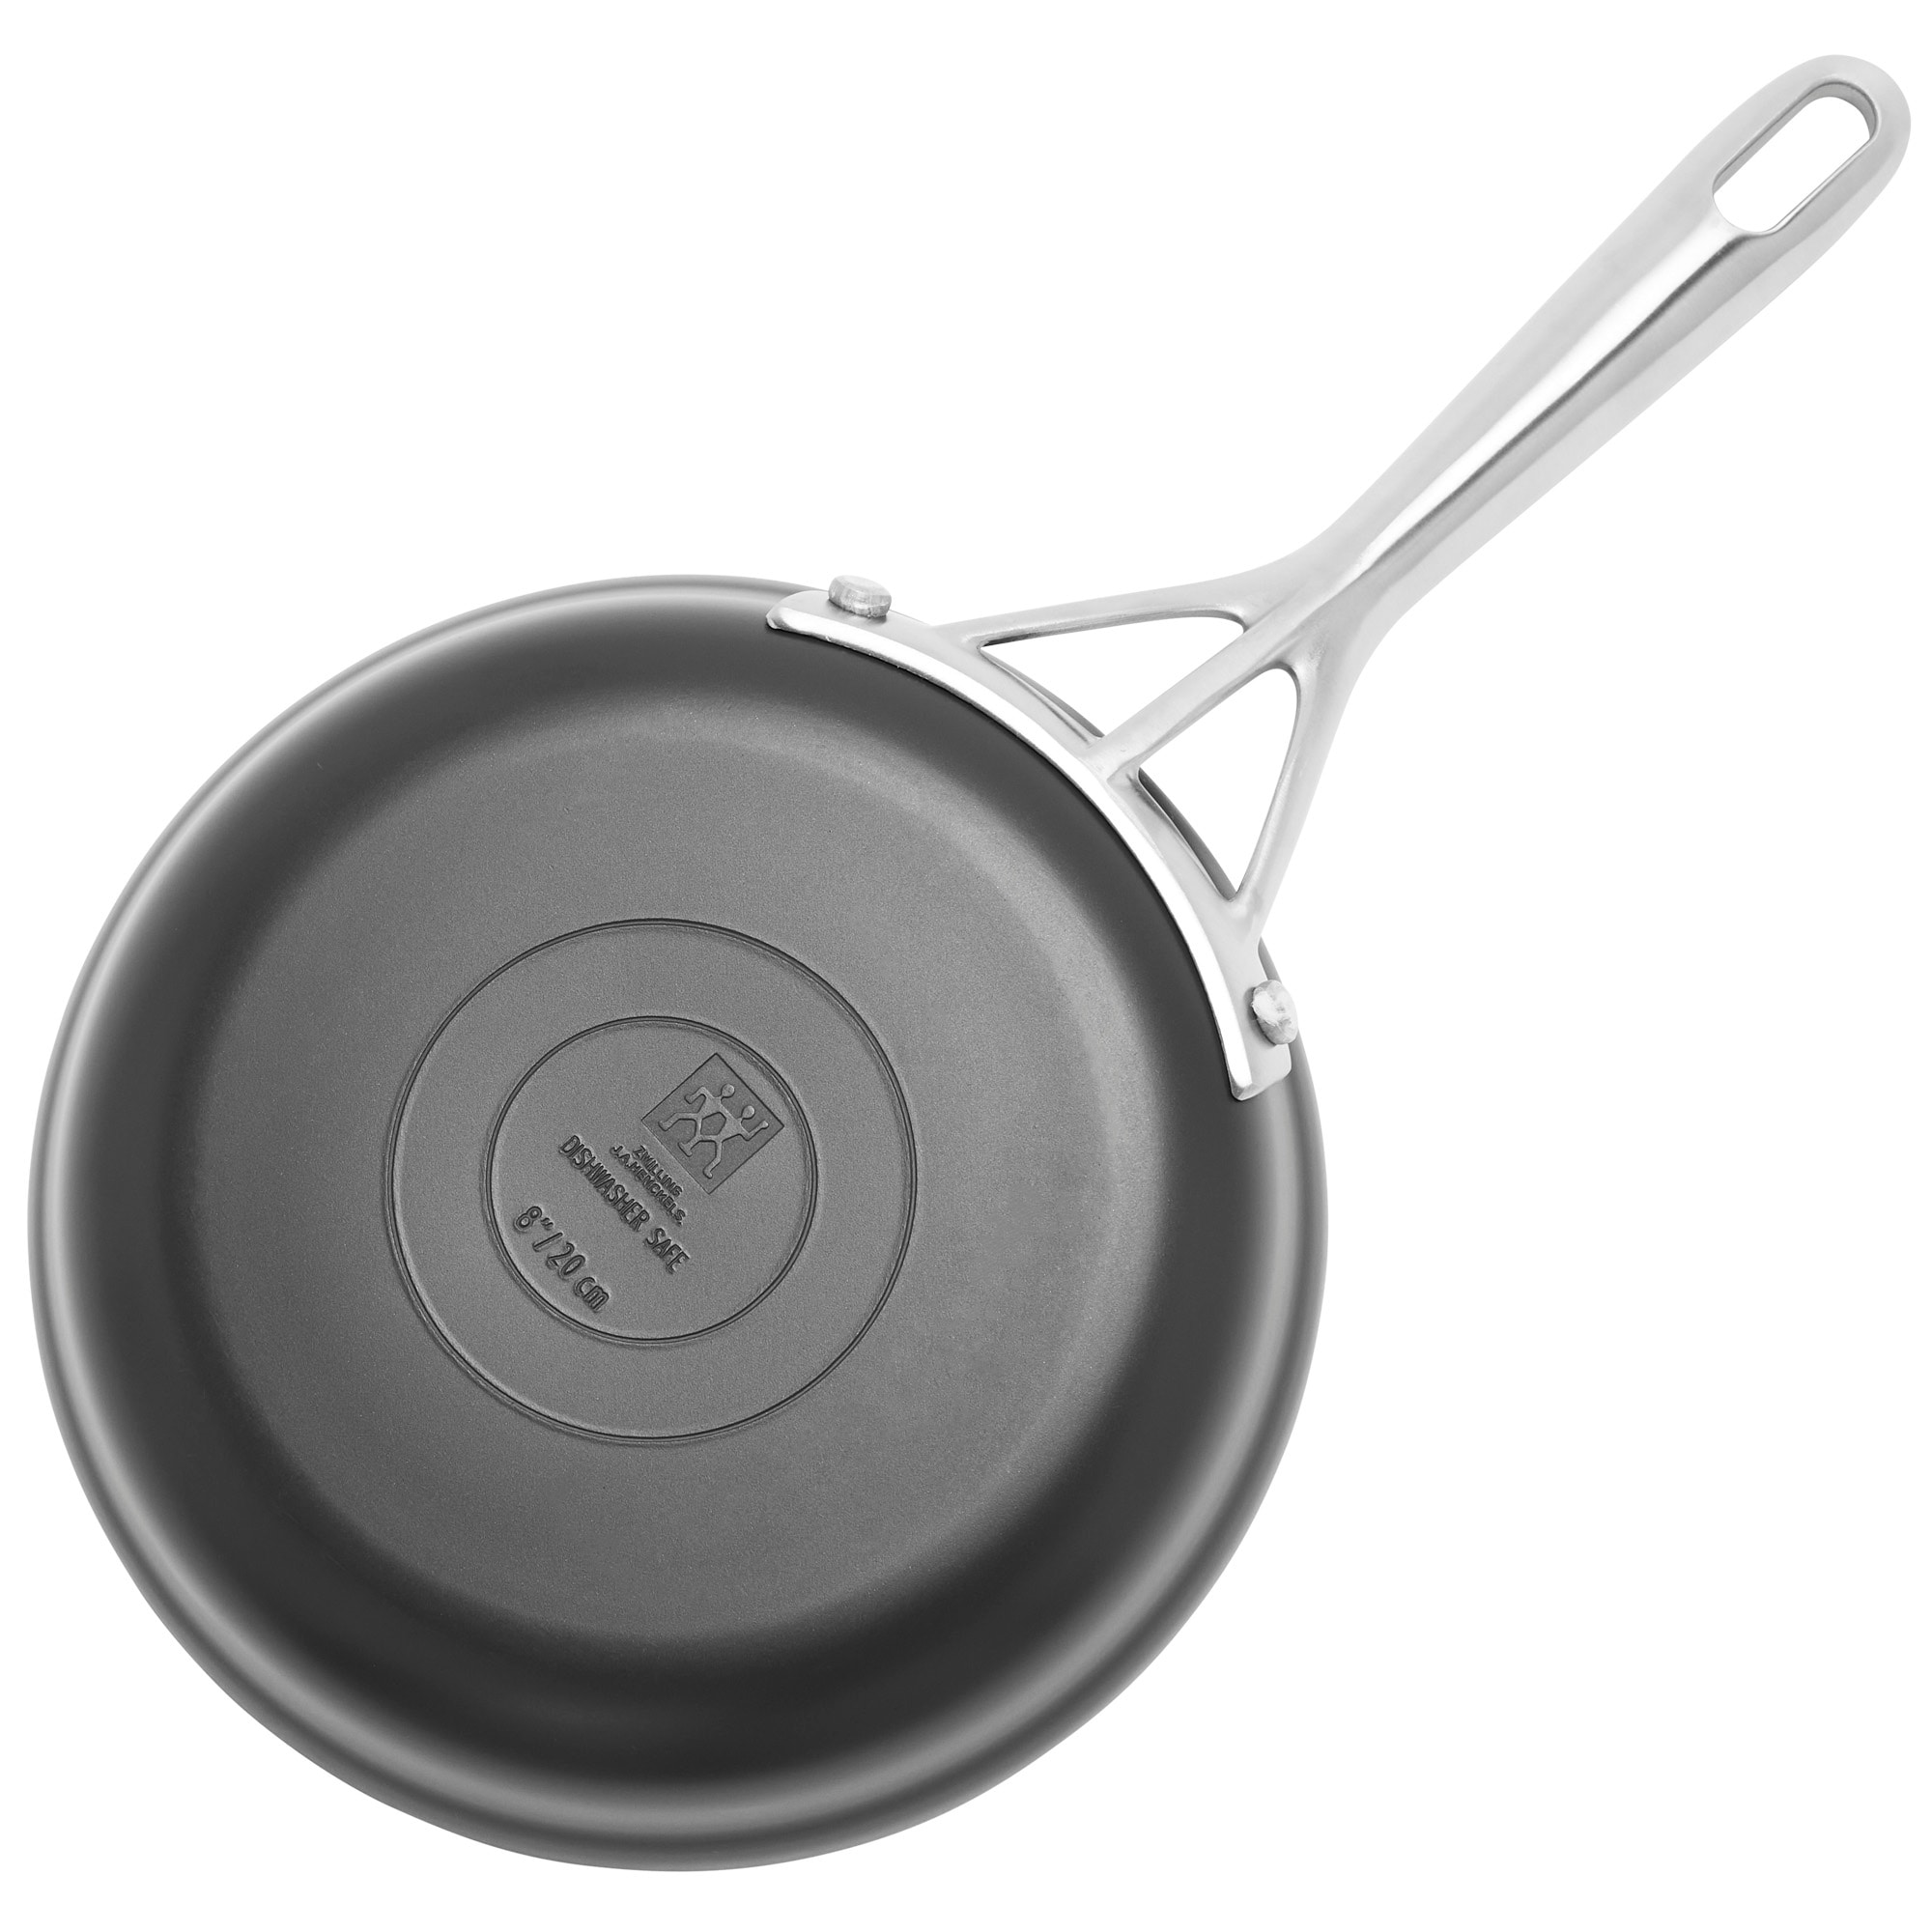 https://ak1.ostkcdn.com/images/products/is/images/direct/29a533afaabfc99339f333b4498060da4c301b17/ZWILLING-Motion-Hard-Anodized-Aluminum-Nonstick-Fry-Pan.jpg